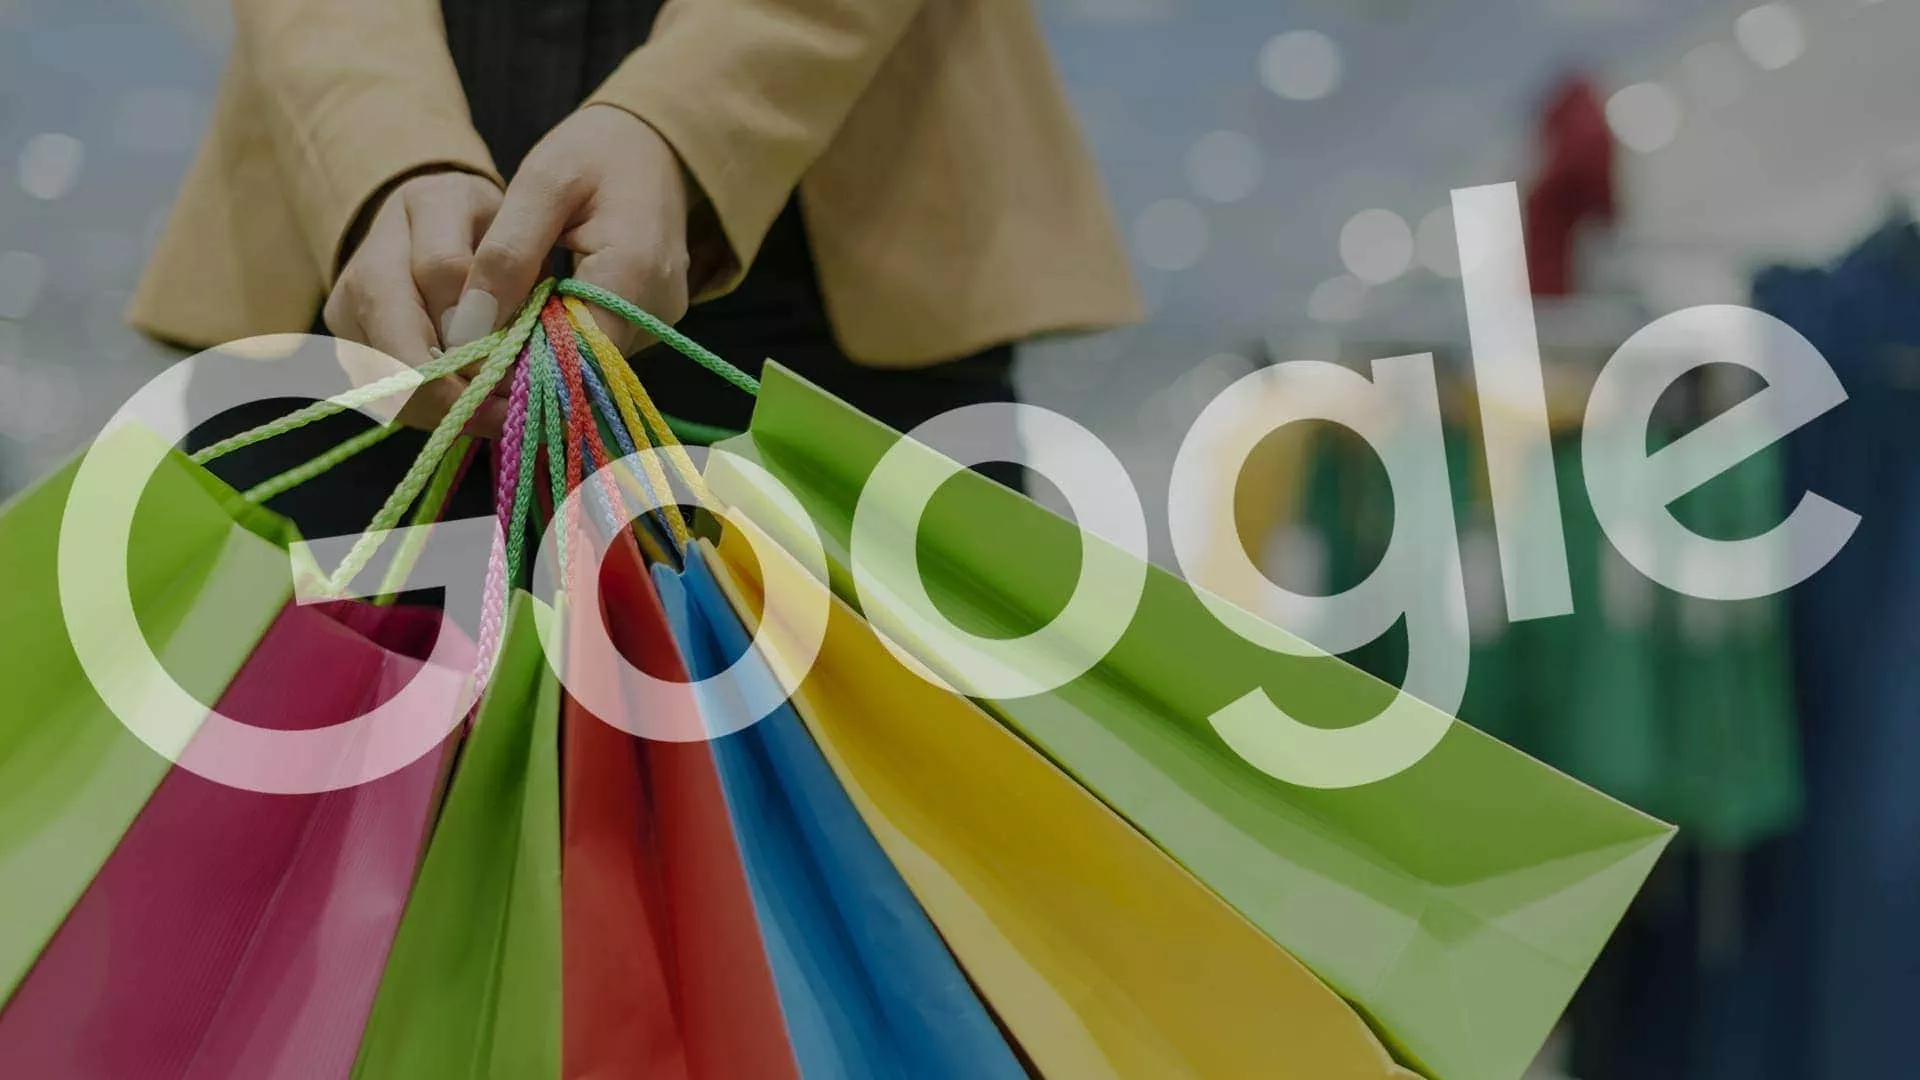 5 Splendid Google Shopping Features for Retailers